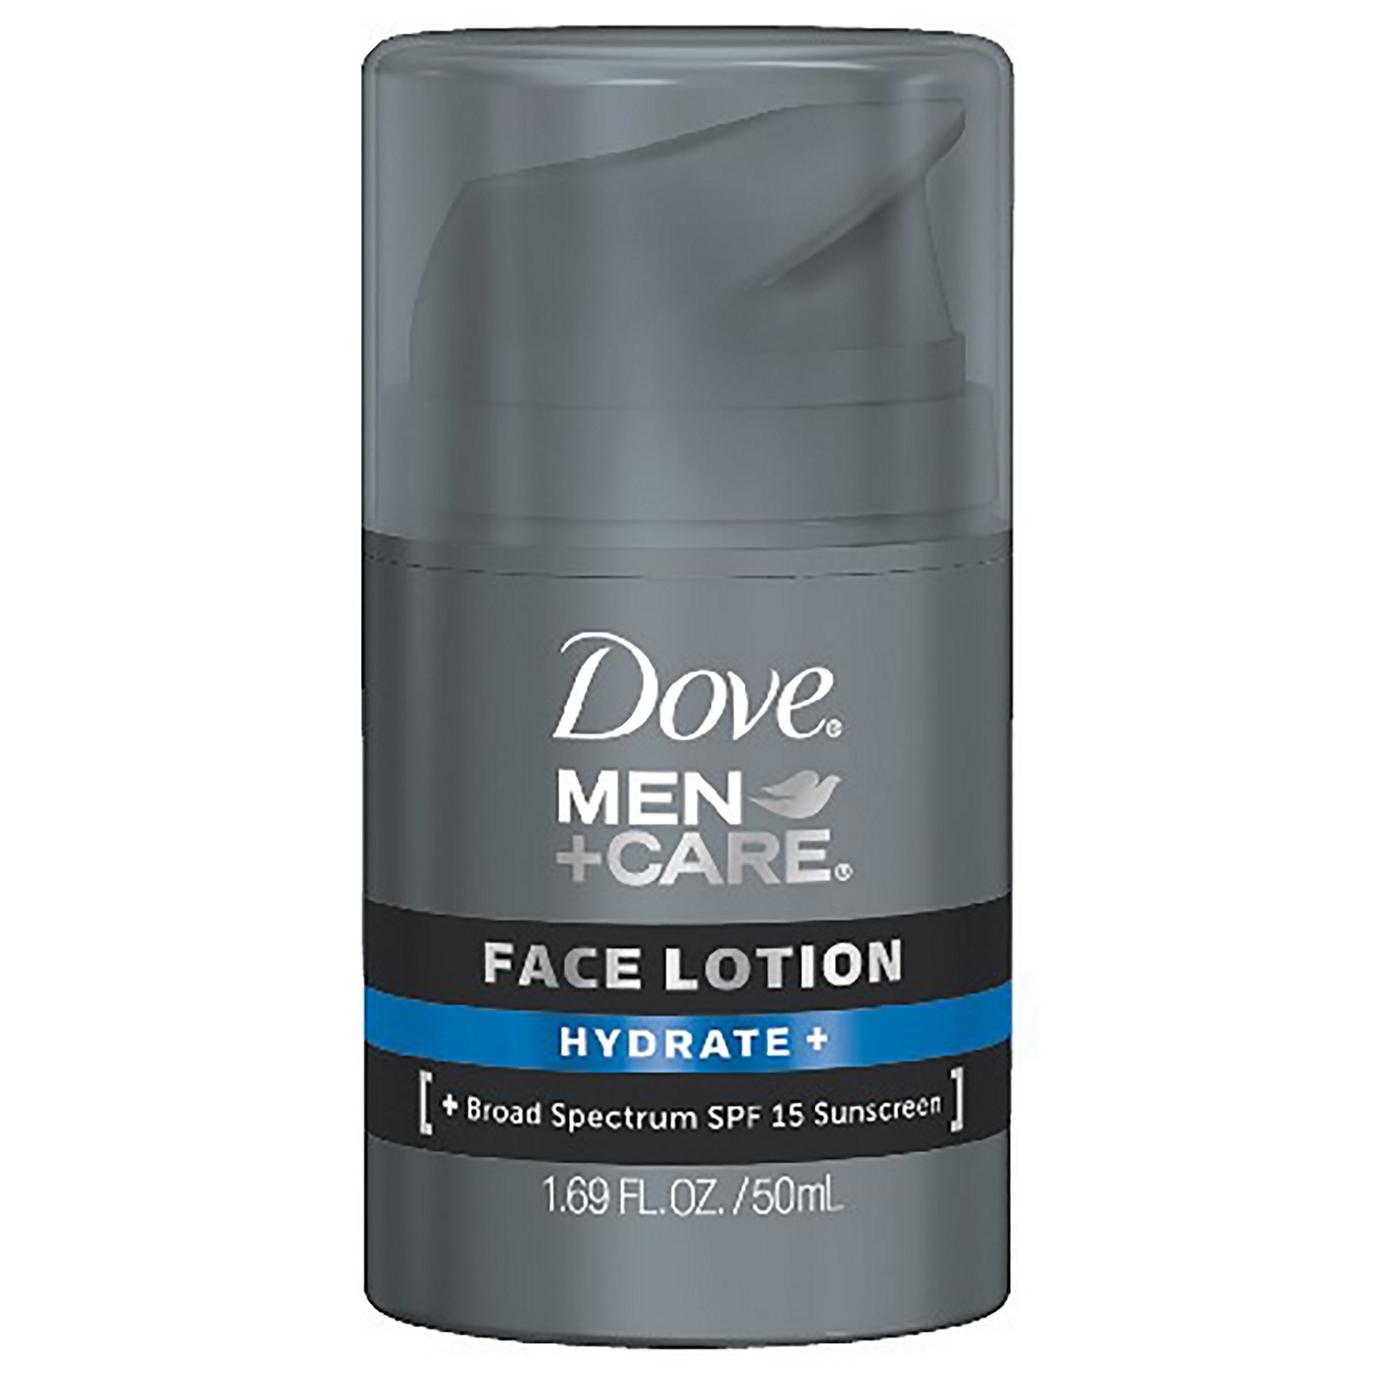 Dove Men+Care Hydrate+ Face Lotion; image 1 of 4